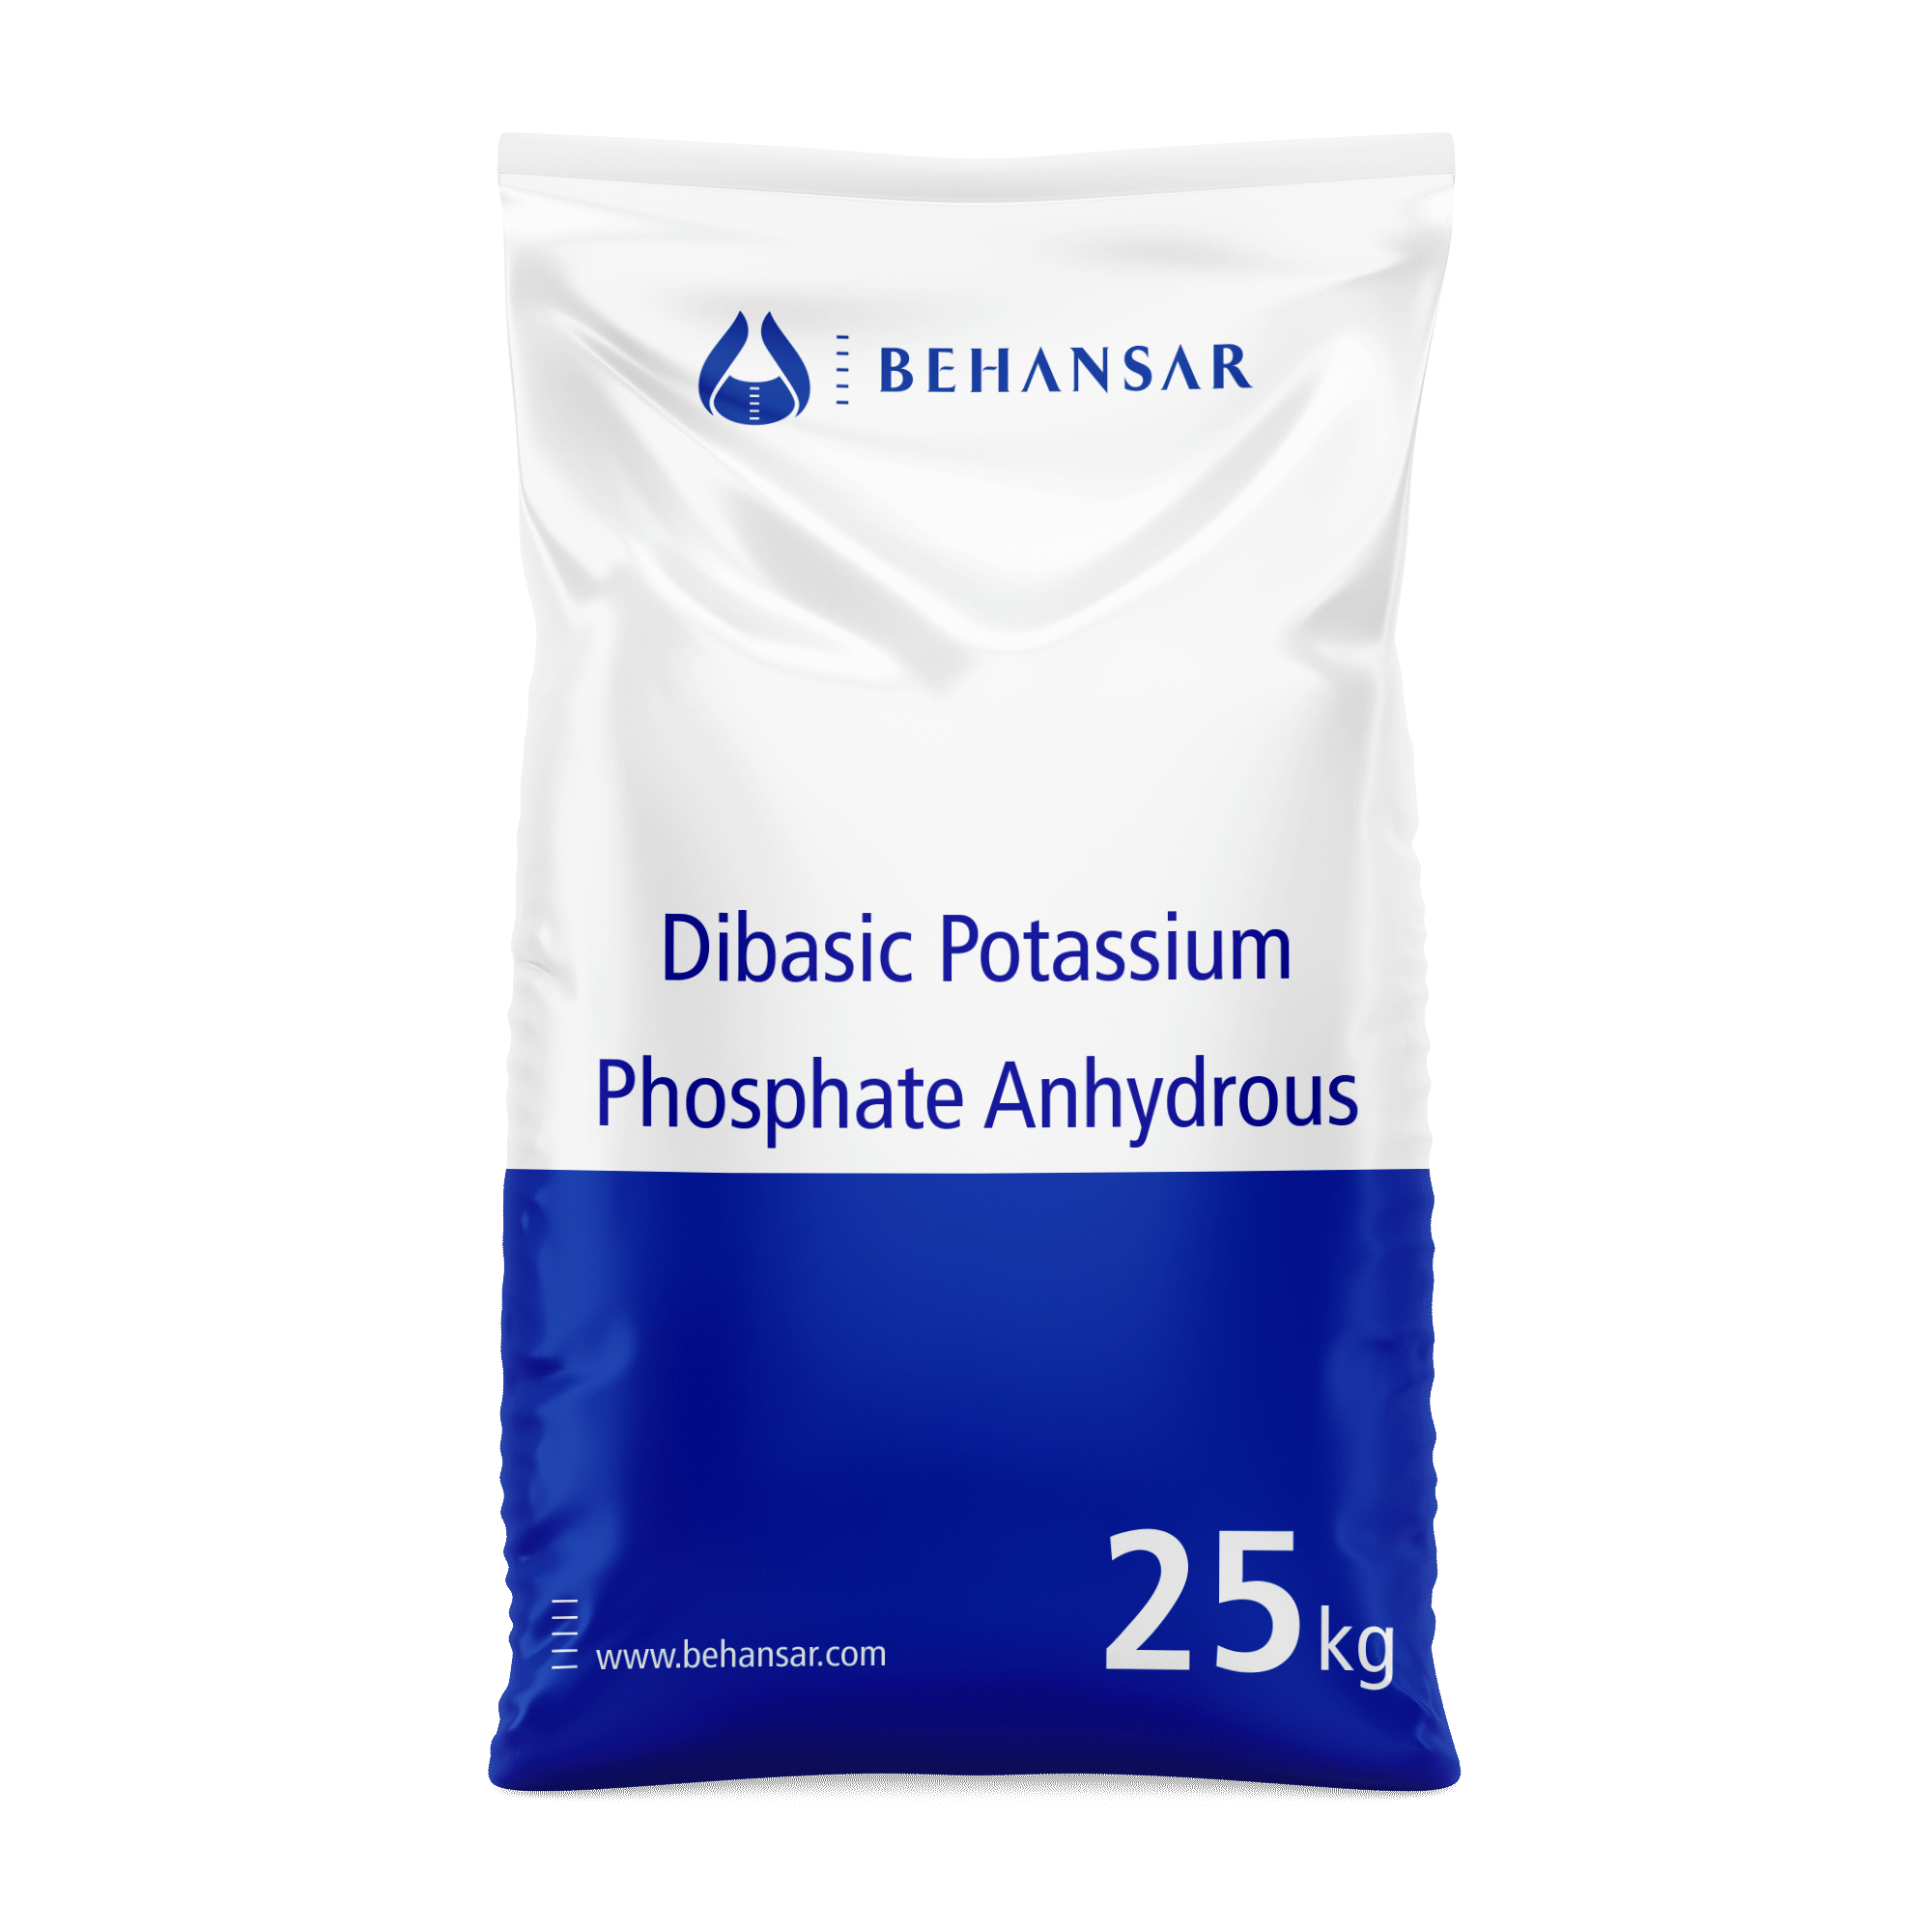 Dibasic Potassium Phosphate Anhydrous is one of the products of Behansar Co